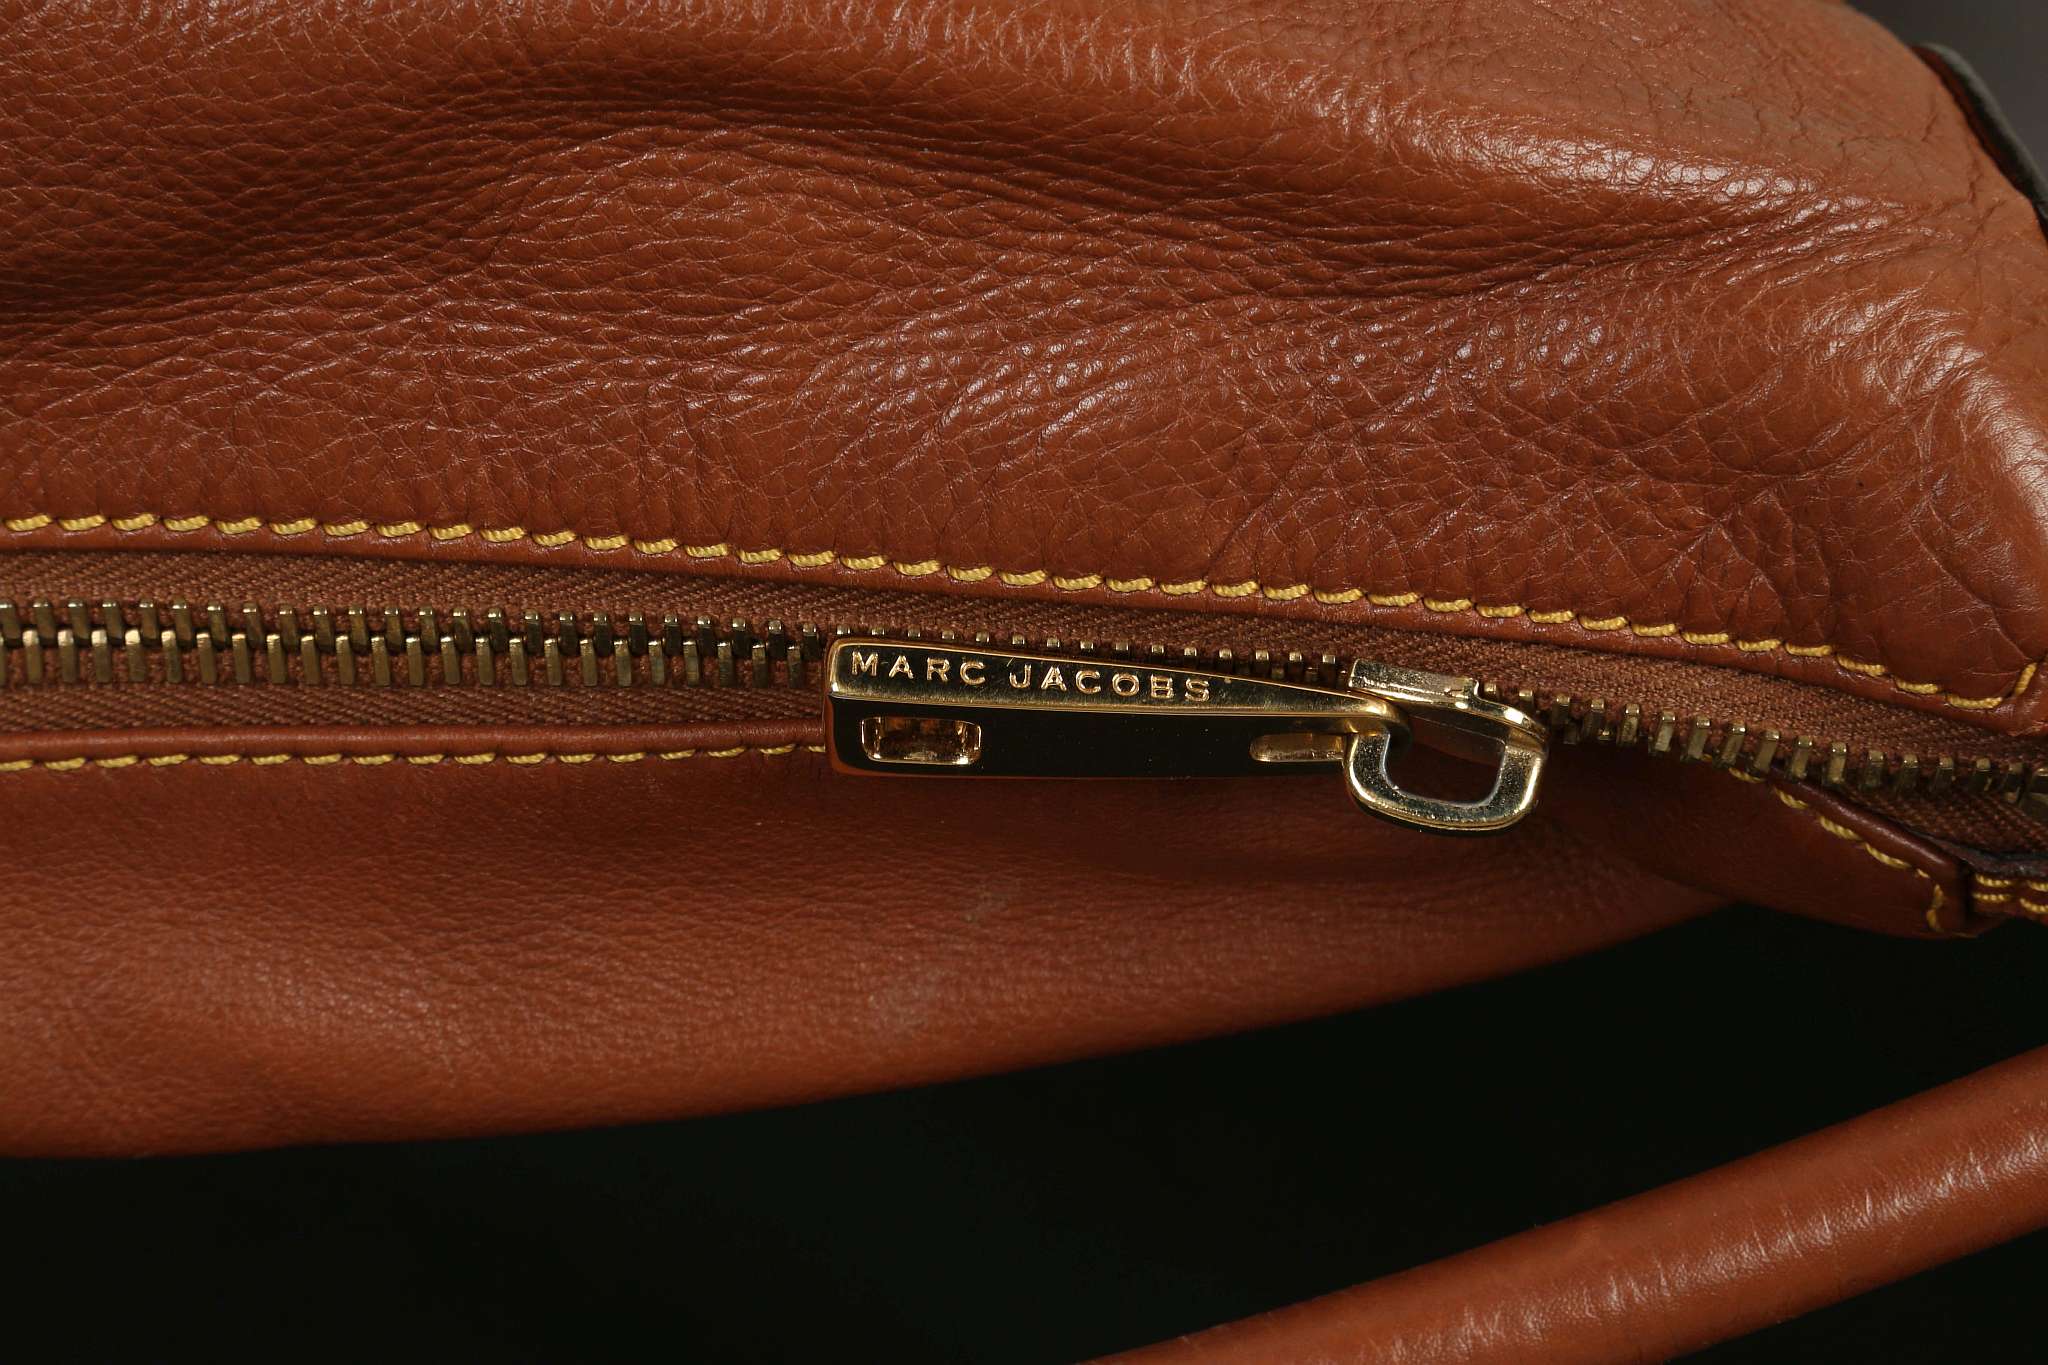 MARC JACOBS BLAKE HOBO BAG, soft brown leather with contrasting stitching, gilt tone hardware, - Image 5 of 6